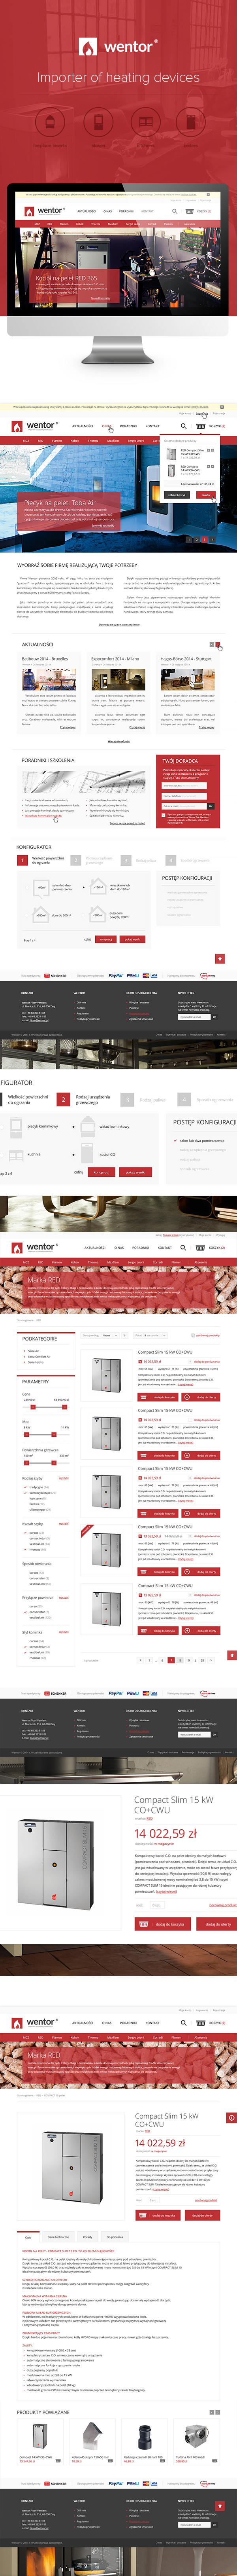 Wentor e-commerce strategy red cms